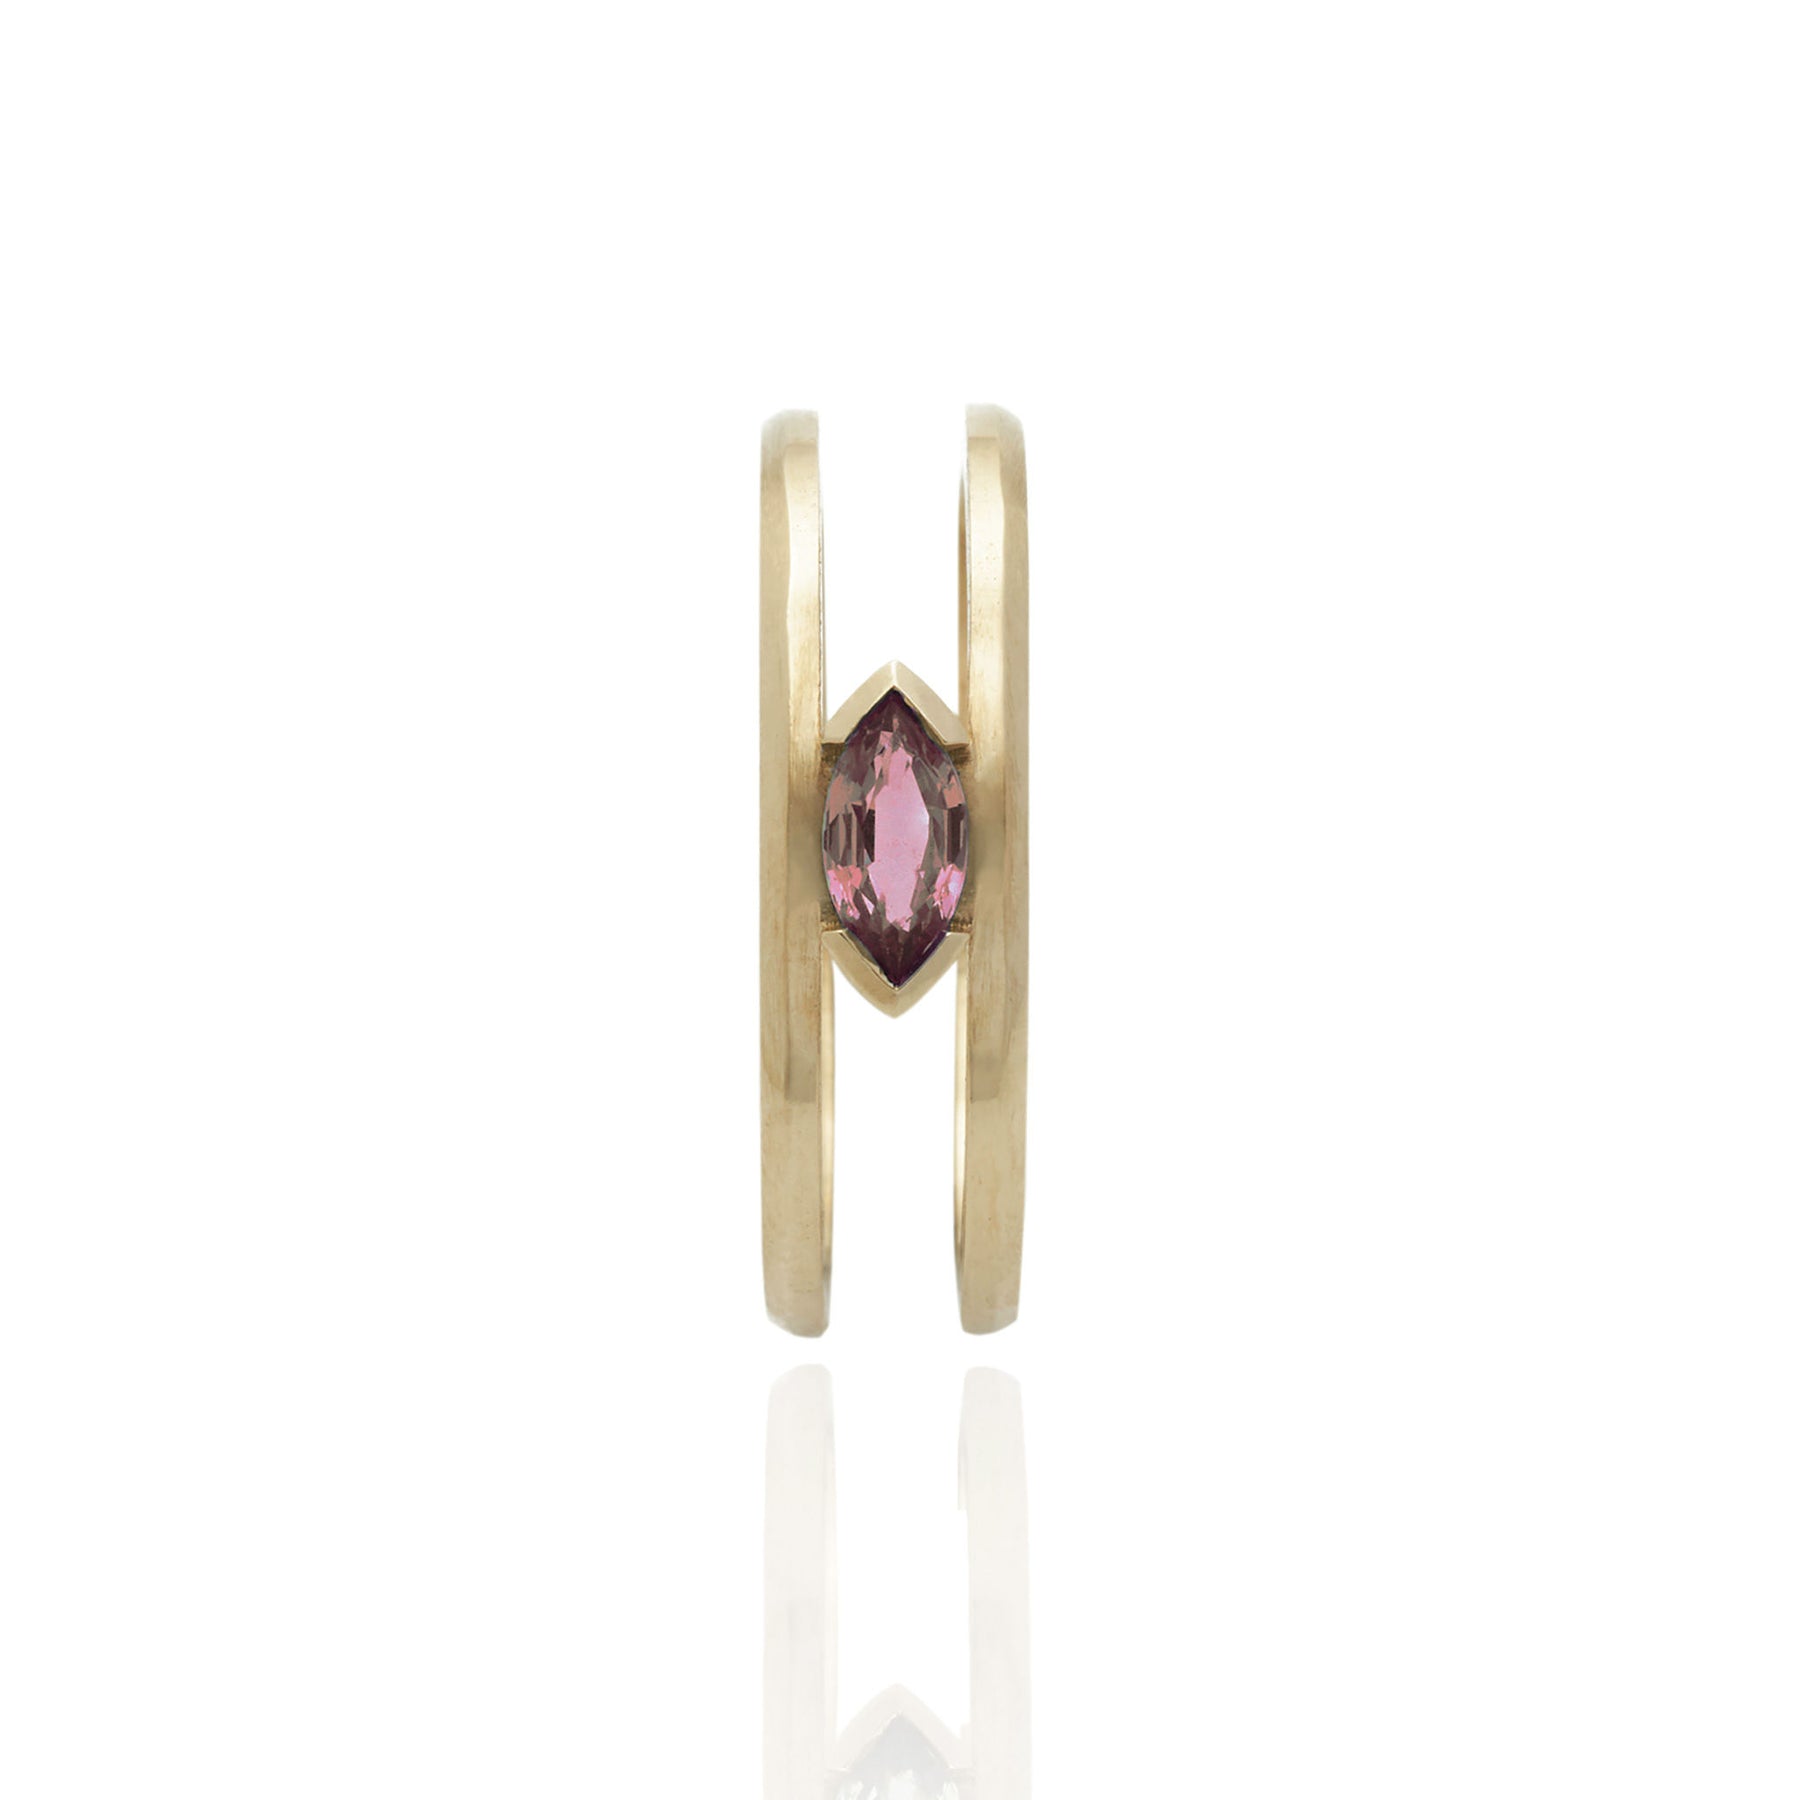 STAY 9ct Gold Ring - Boutee